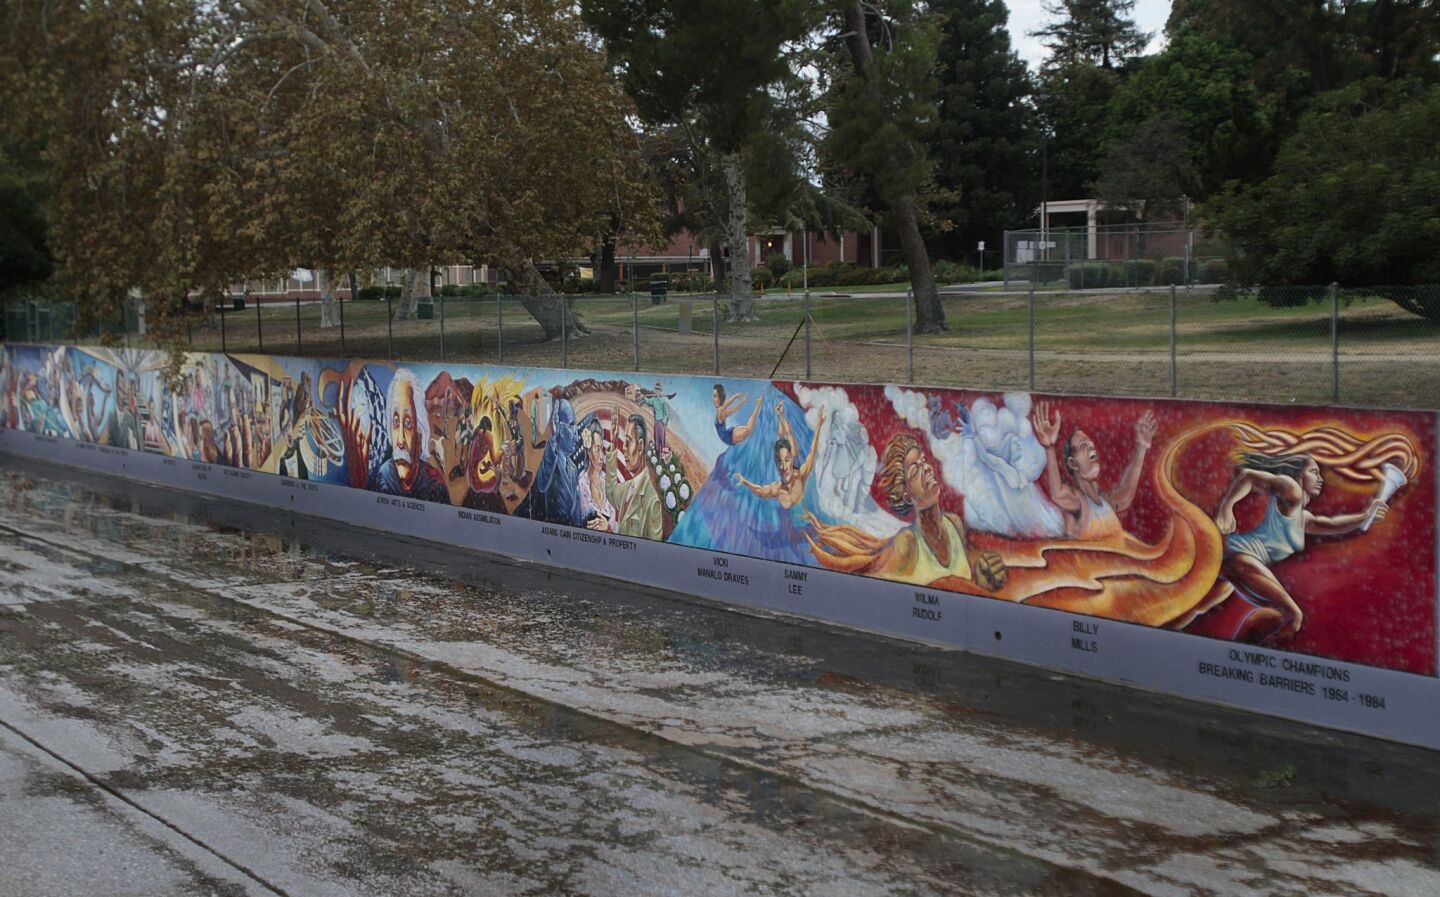 A portion of the walk features "The Great Wall of Los Angeles," a public art project that is 0.6 miles long.